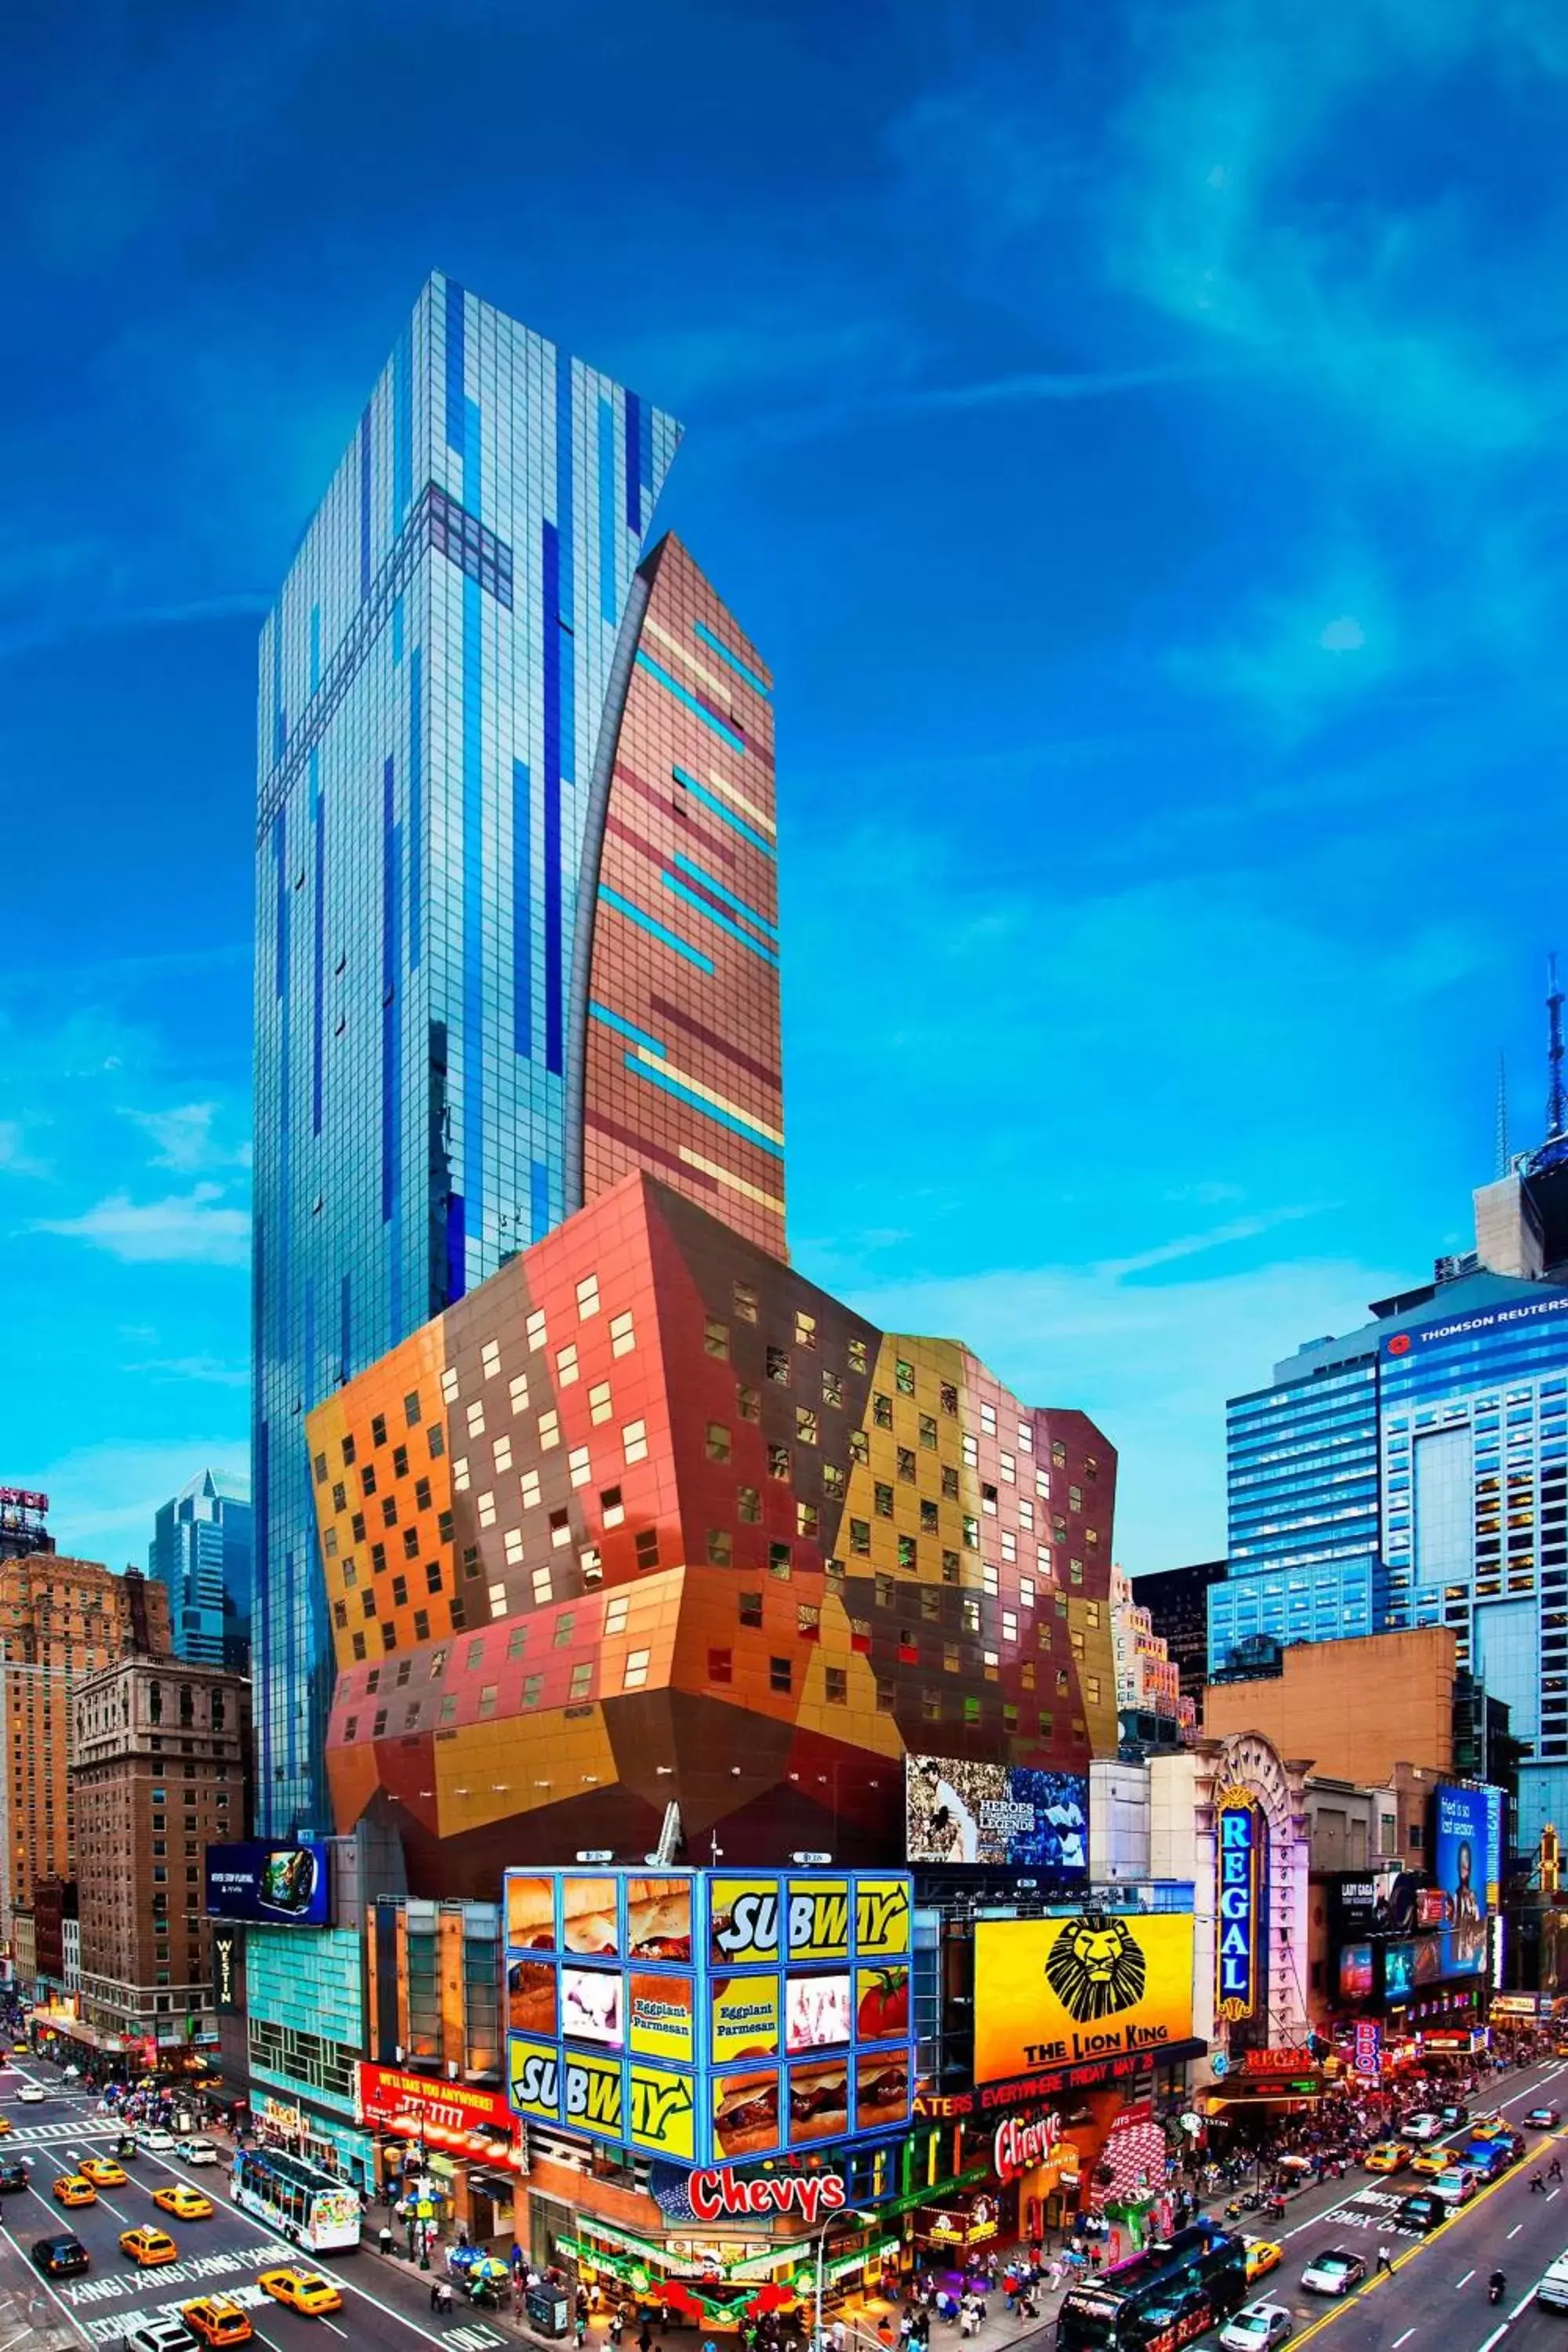 Property Building in The Westin New York at Times Square